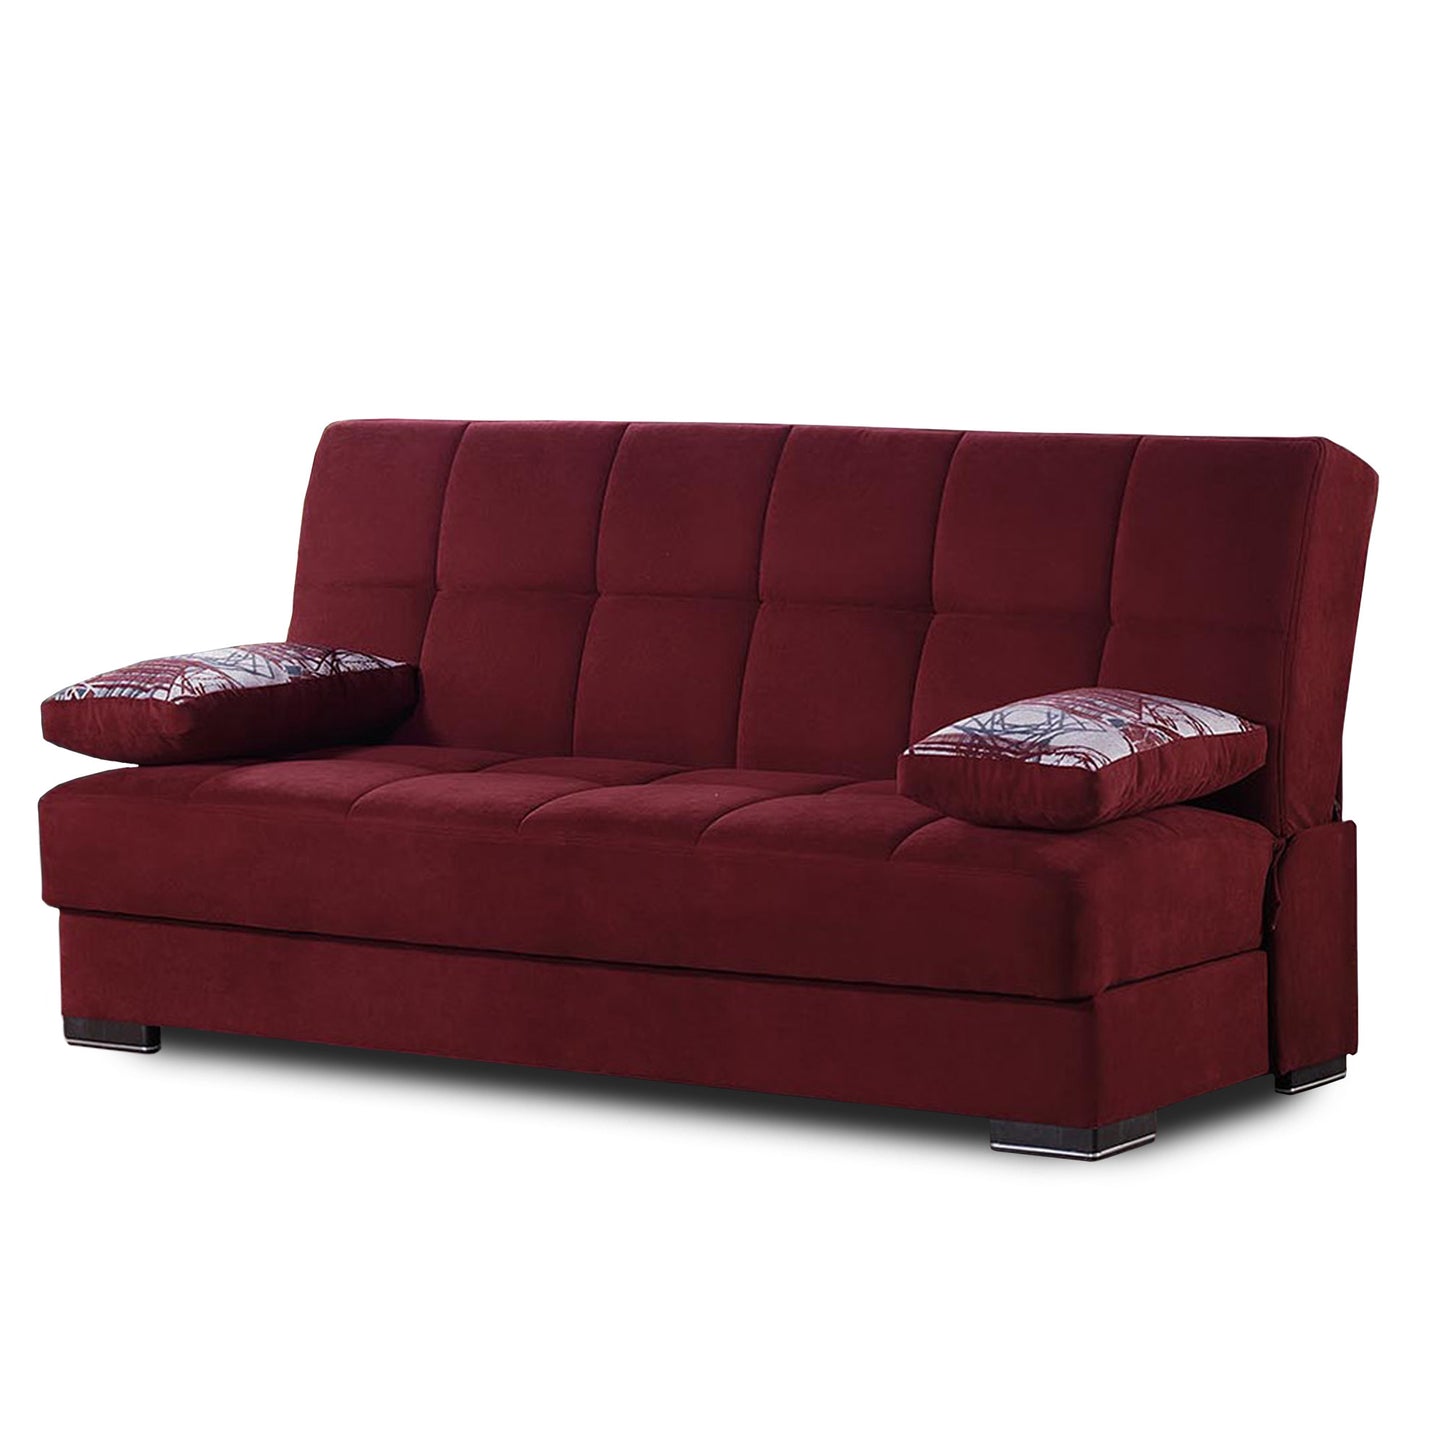 75" Red Chenille Sleeper Sofa And Toss Pillows With Brown Legs